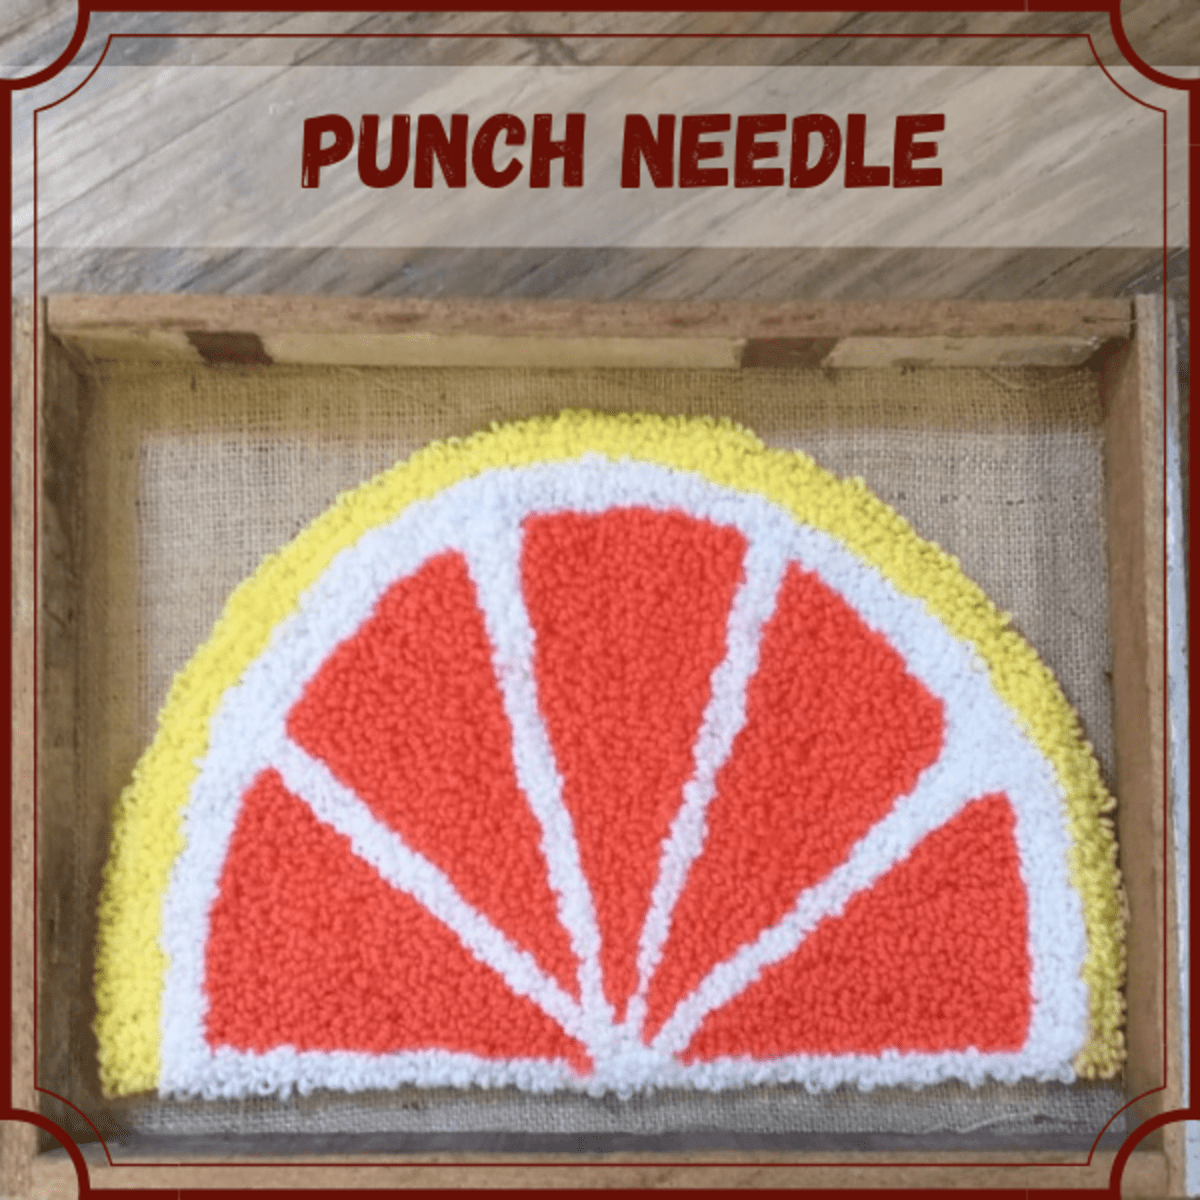 Punch Needle: Step-by-Step Craft Tutorial for Beginners - FeltMagnet